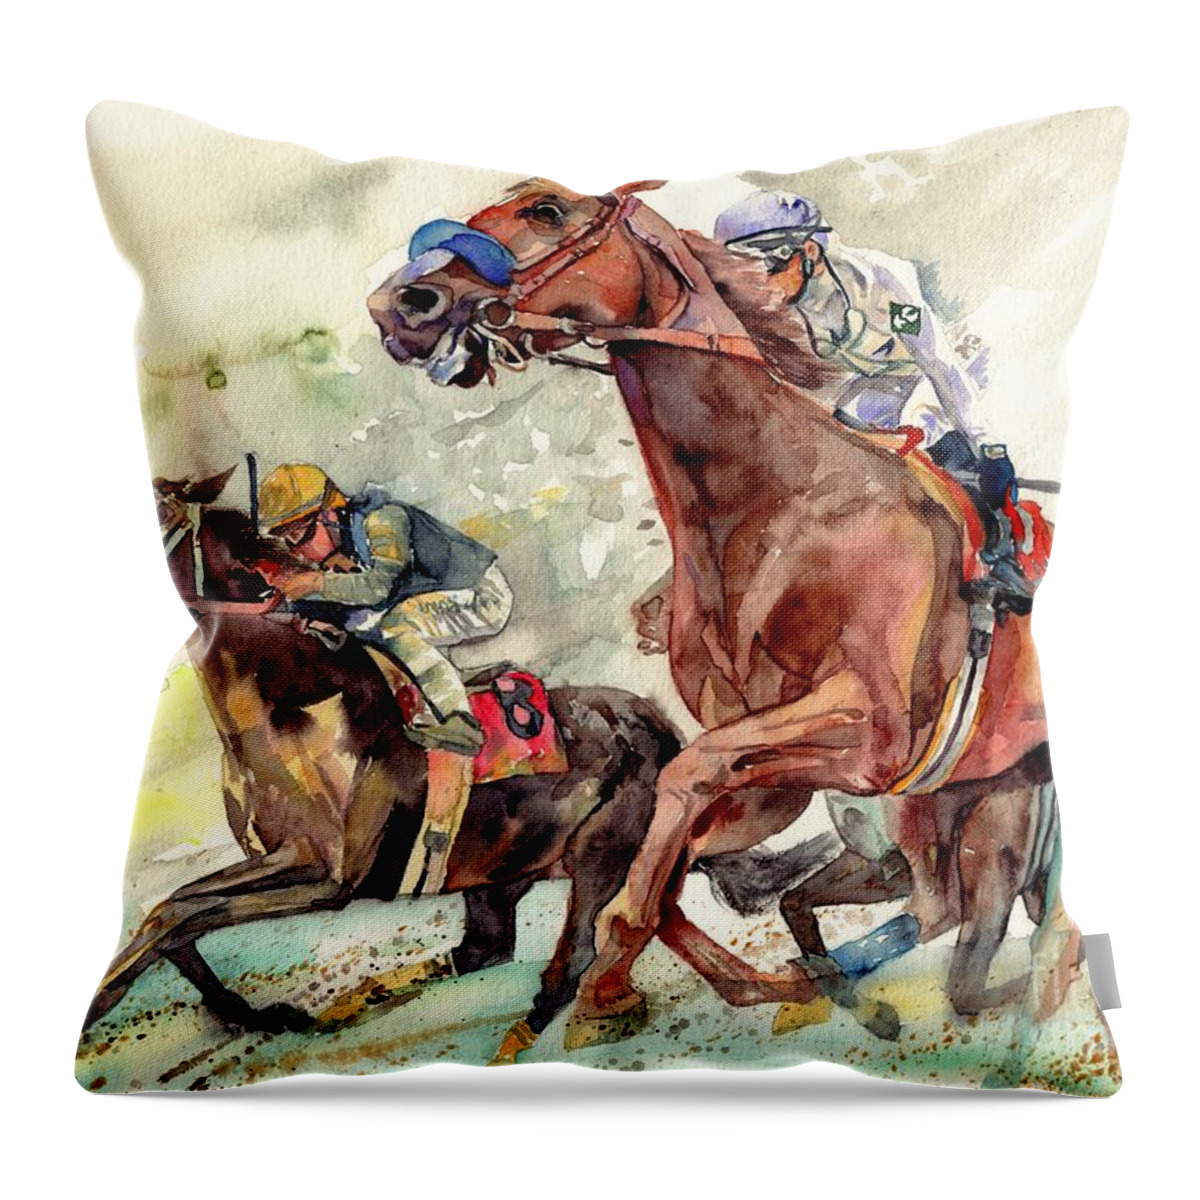 Chamion Throw Pillow featuring the painting The Heart Of A Champion by Suzann Sines